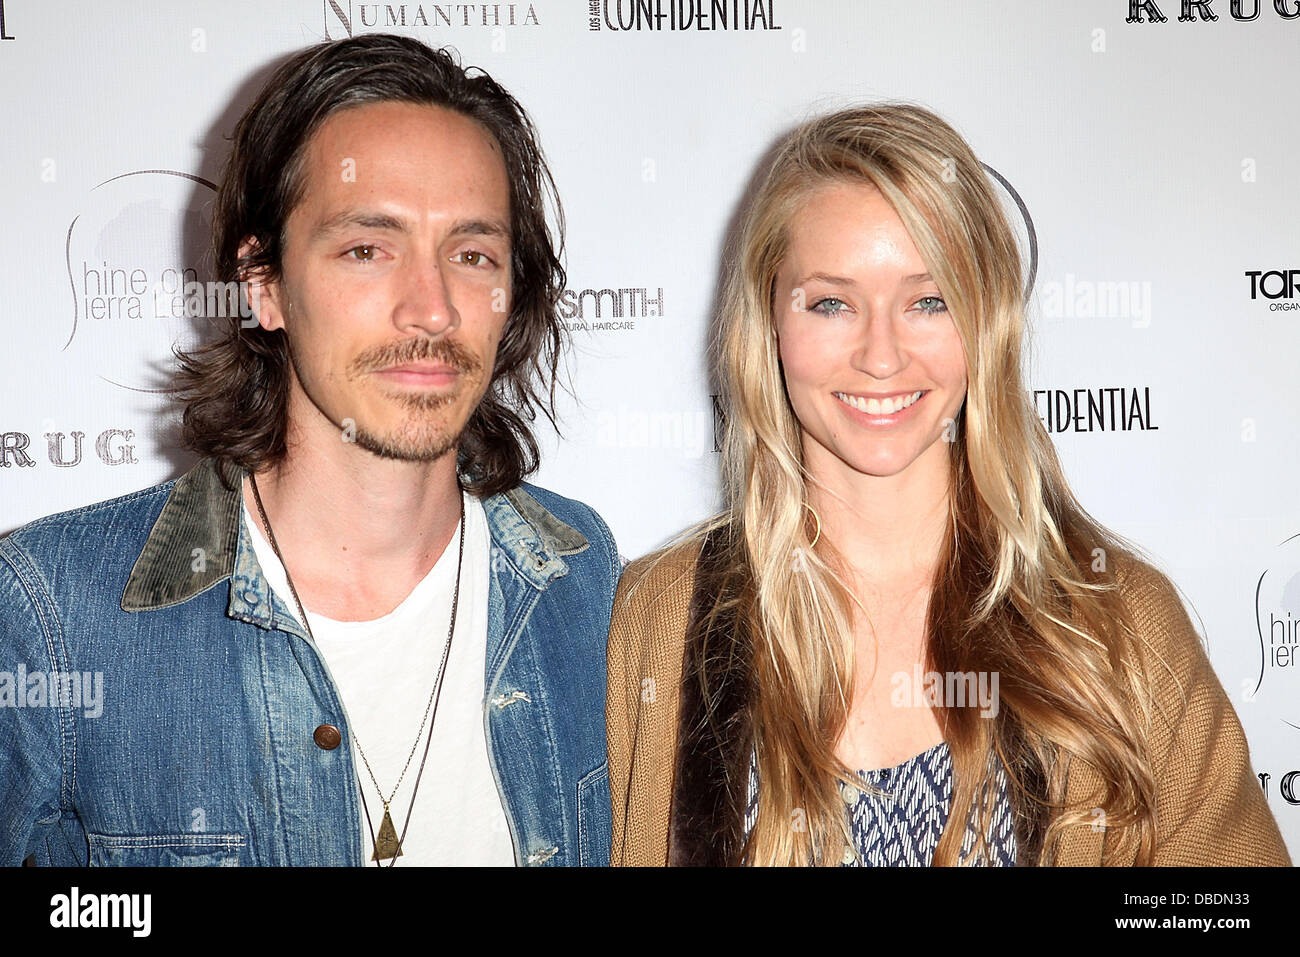 Incubus vocalist Brandon Boyd (L) and actress Baelyn Neff Shine On Sierra Leone 5th Annual Fundraiser at a private residence Venice, California - 25.05.11 Stock Photo